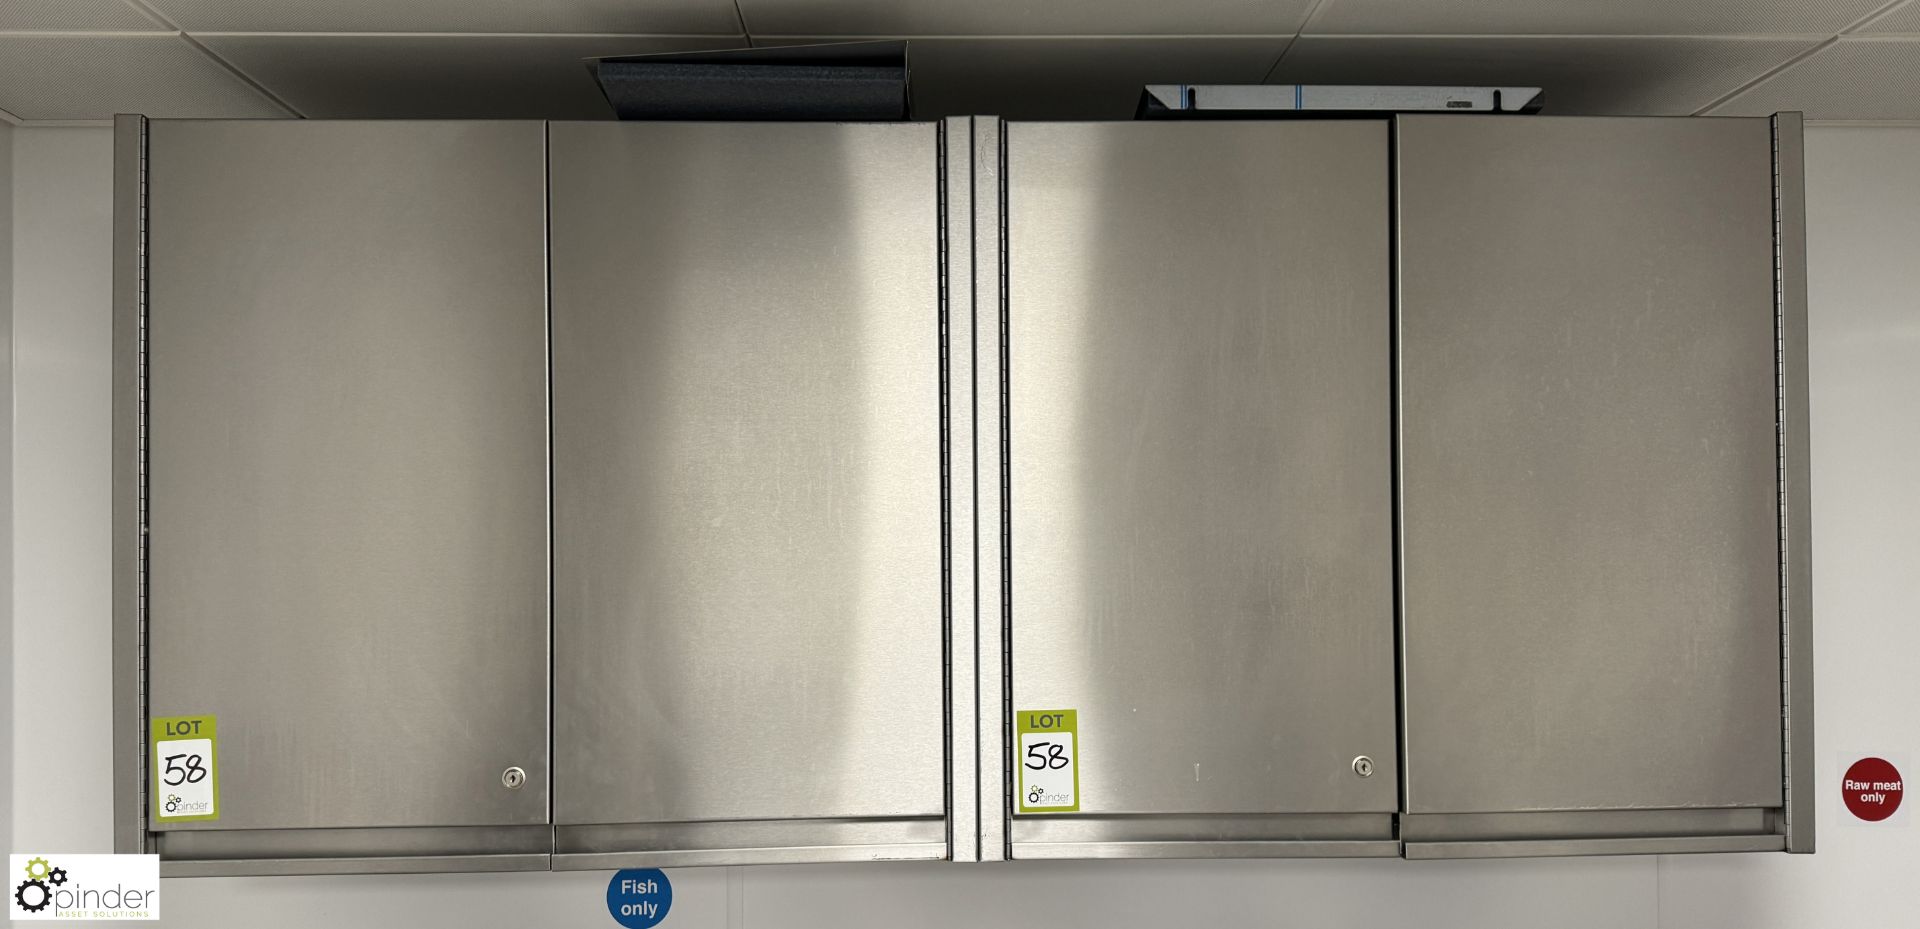 2 stainless steel wall mounted double door Cabinets, 900mm x 350mm x 800mm each (location in